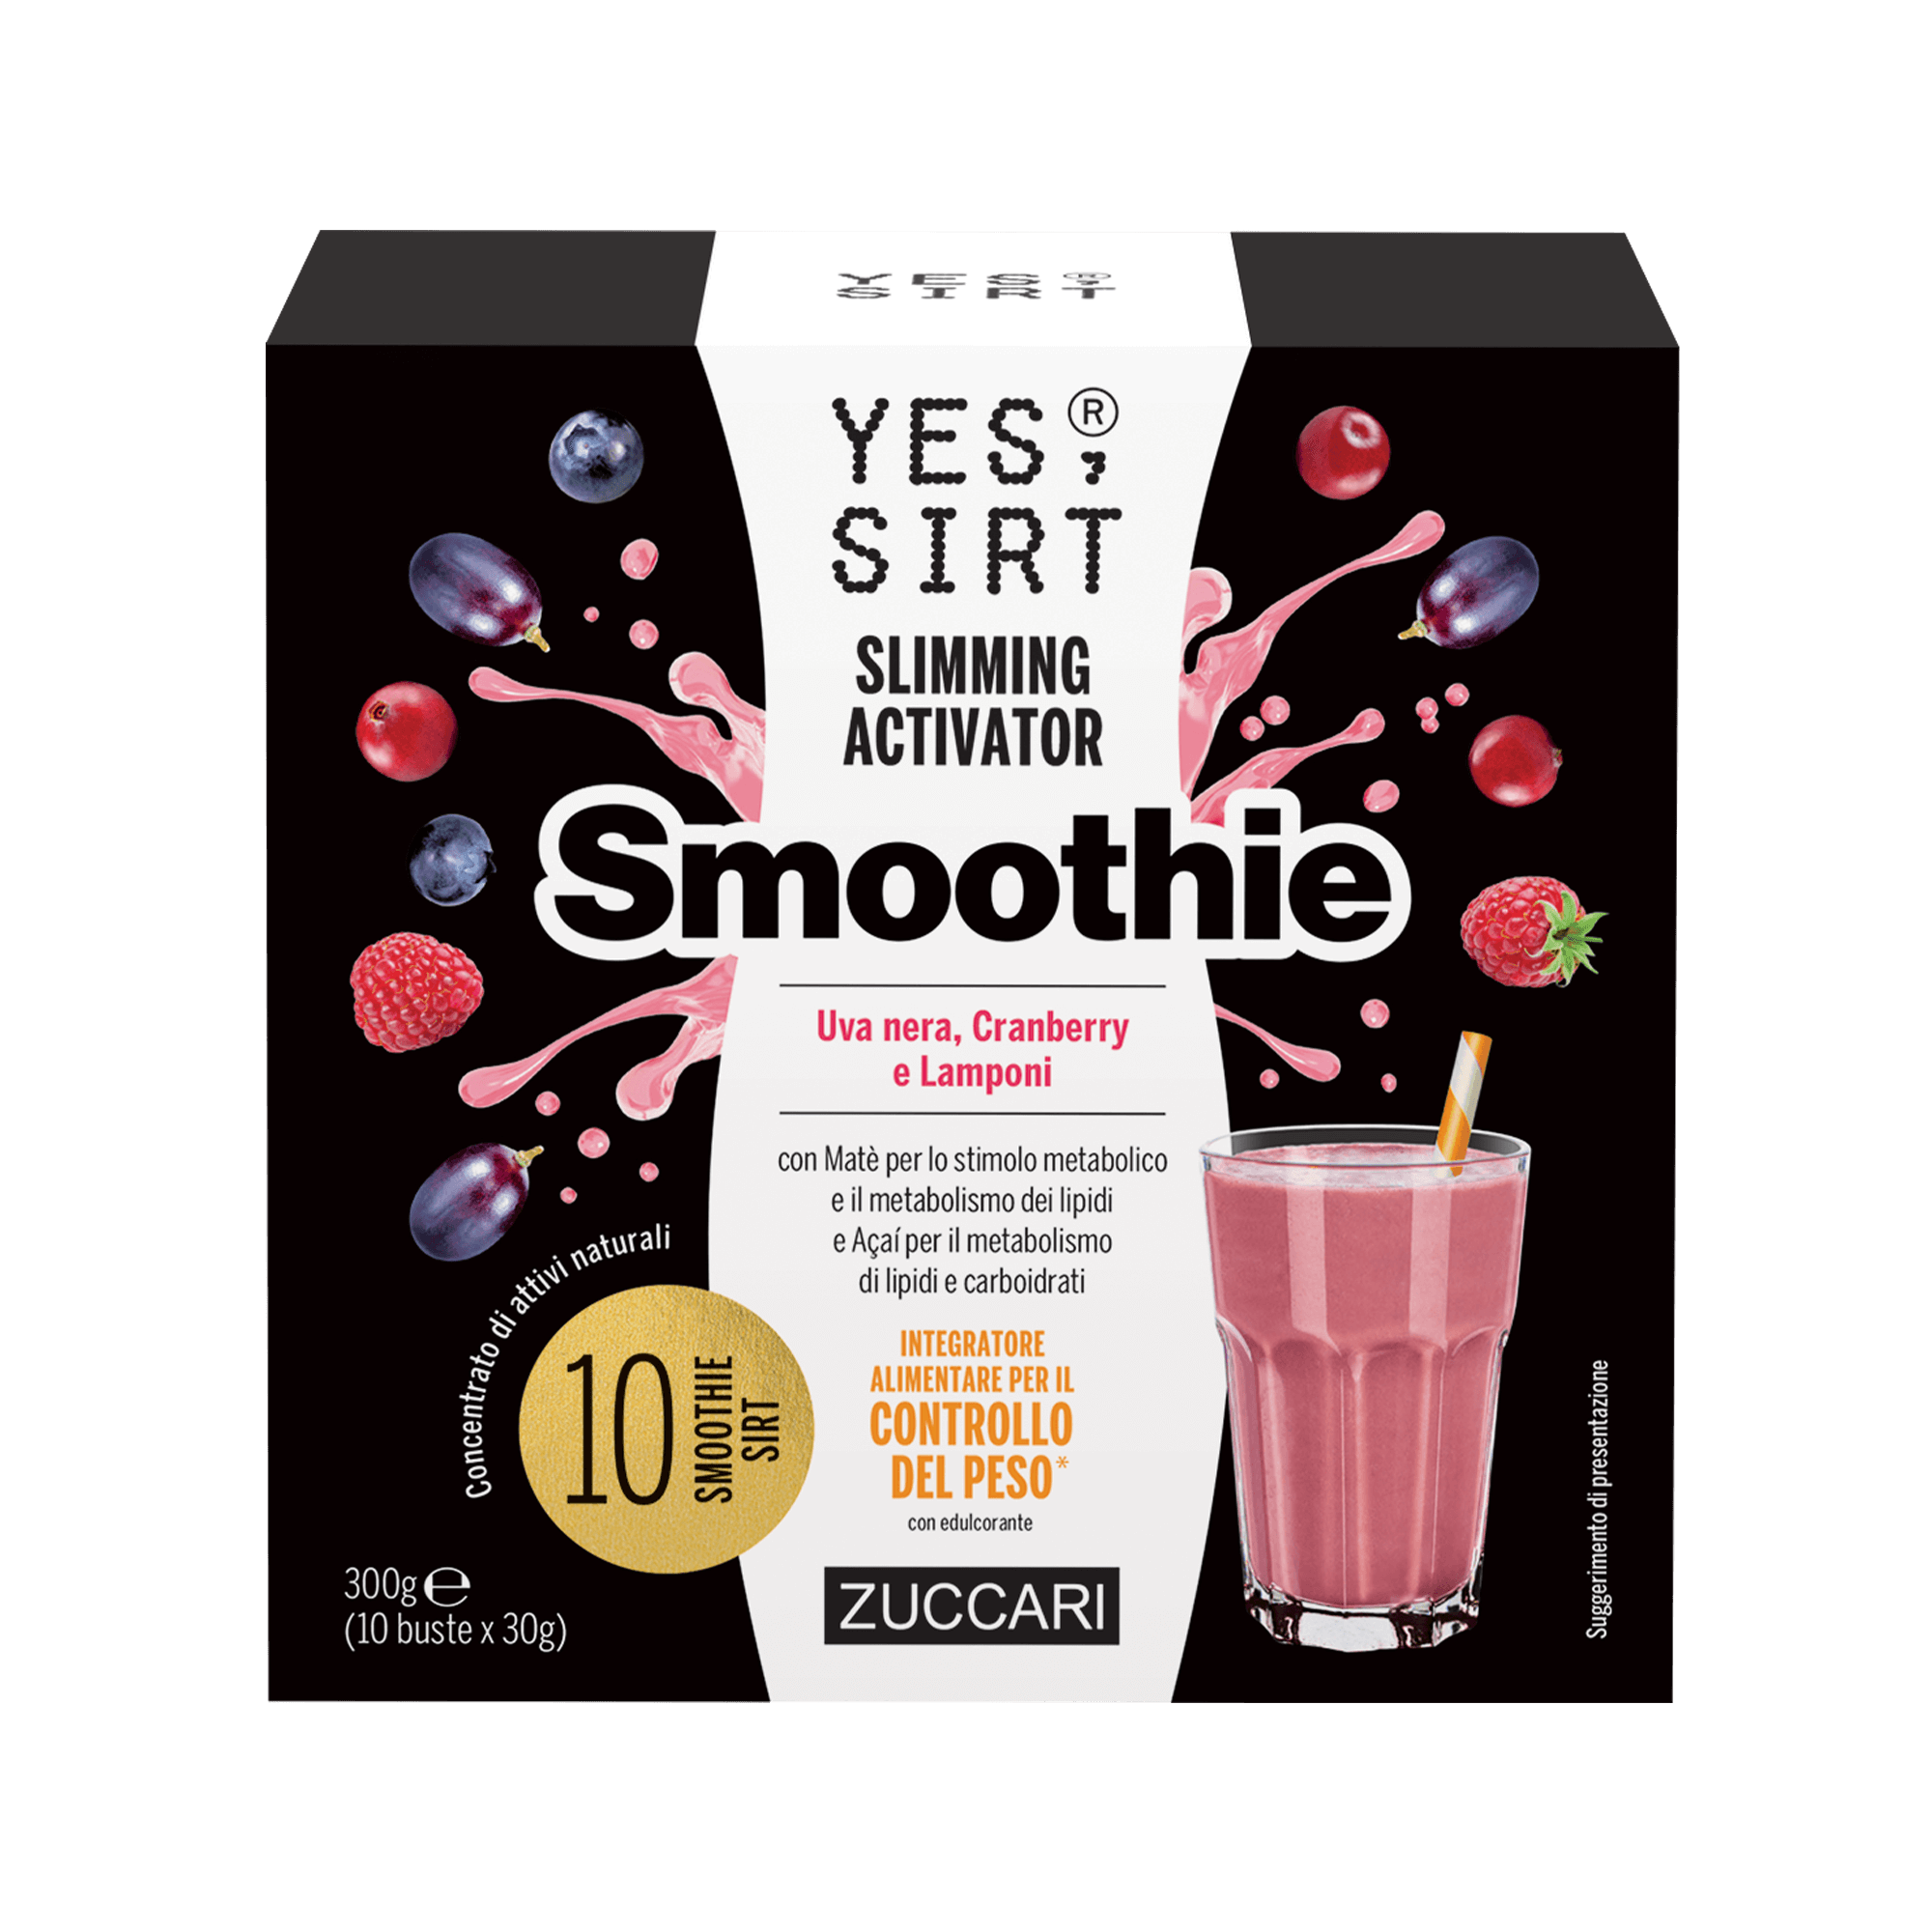 Yes Sirt Slimming Activator Smoothie Uva nera, Cranberry e Lamponi